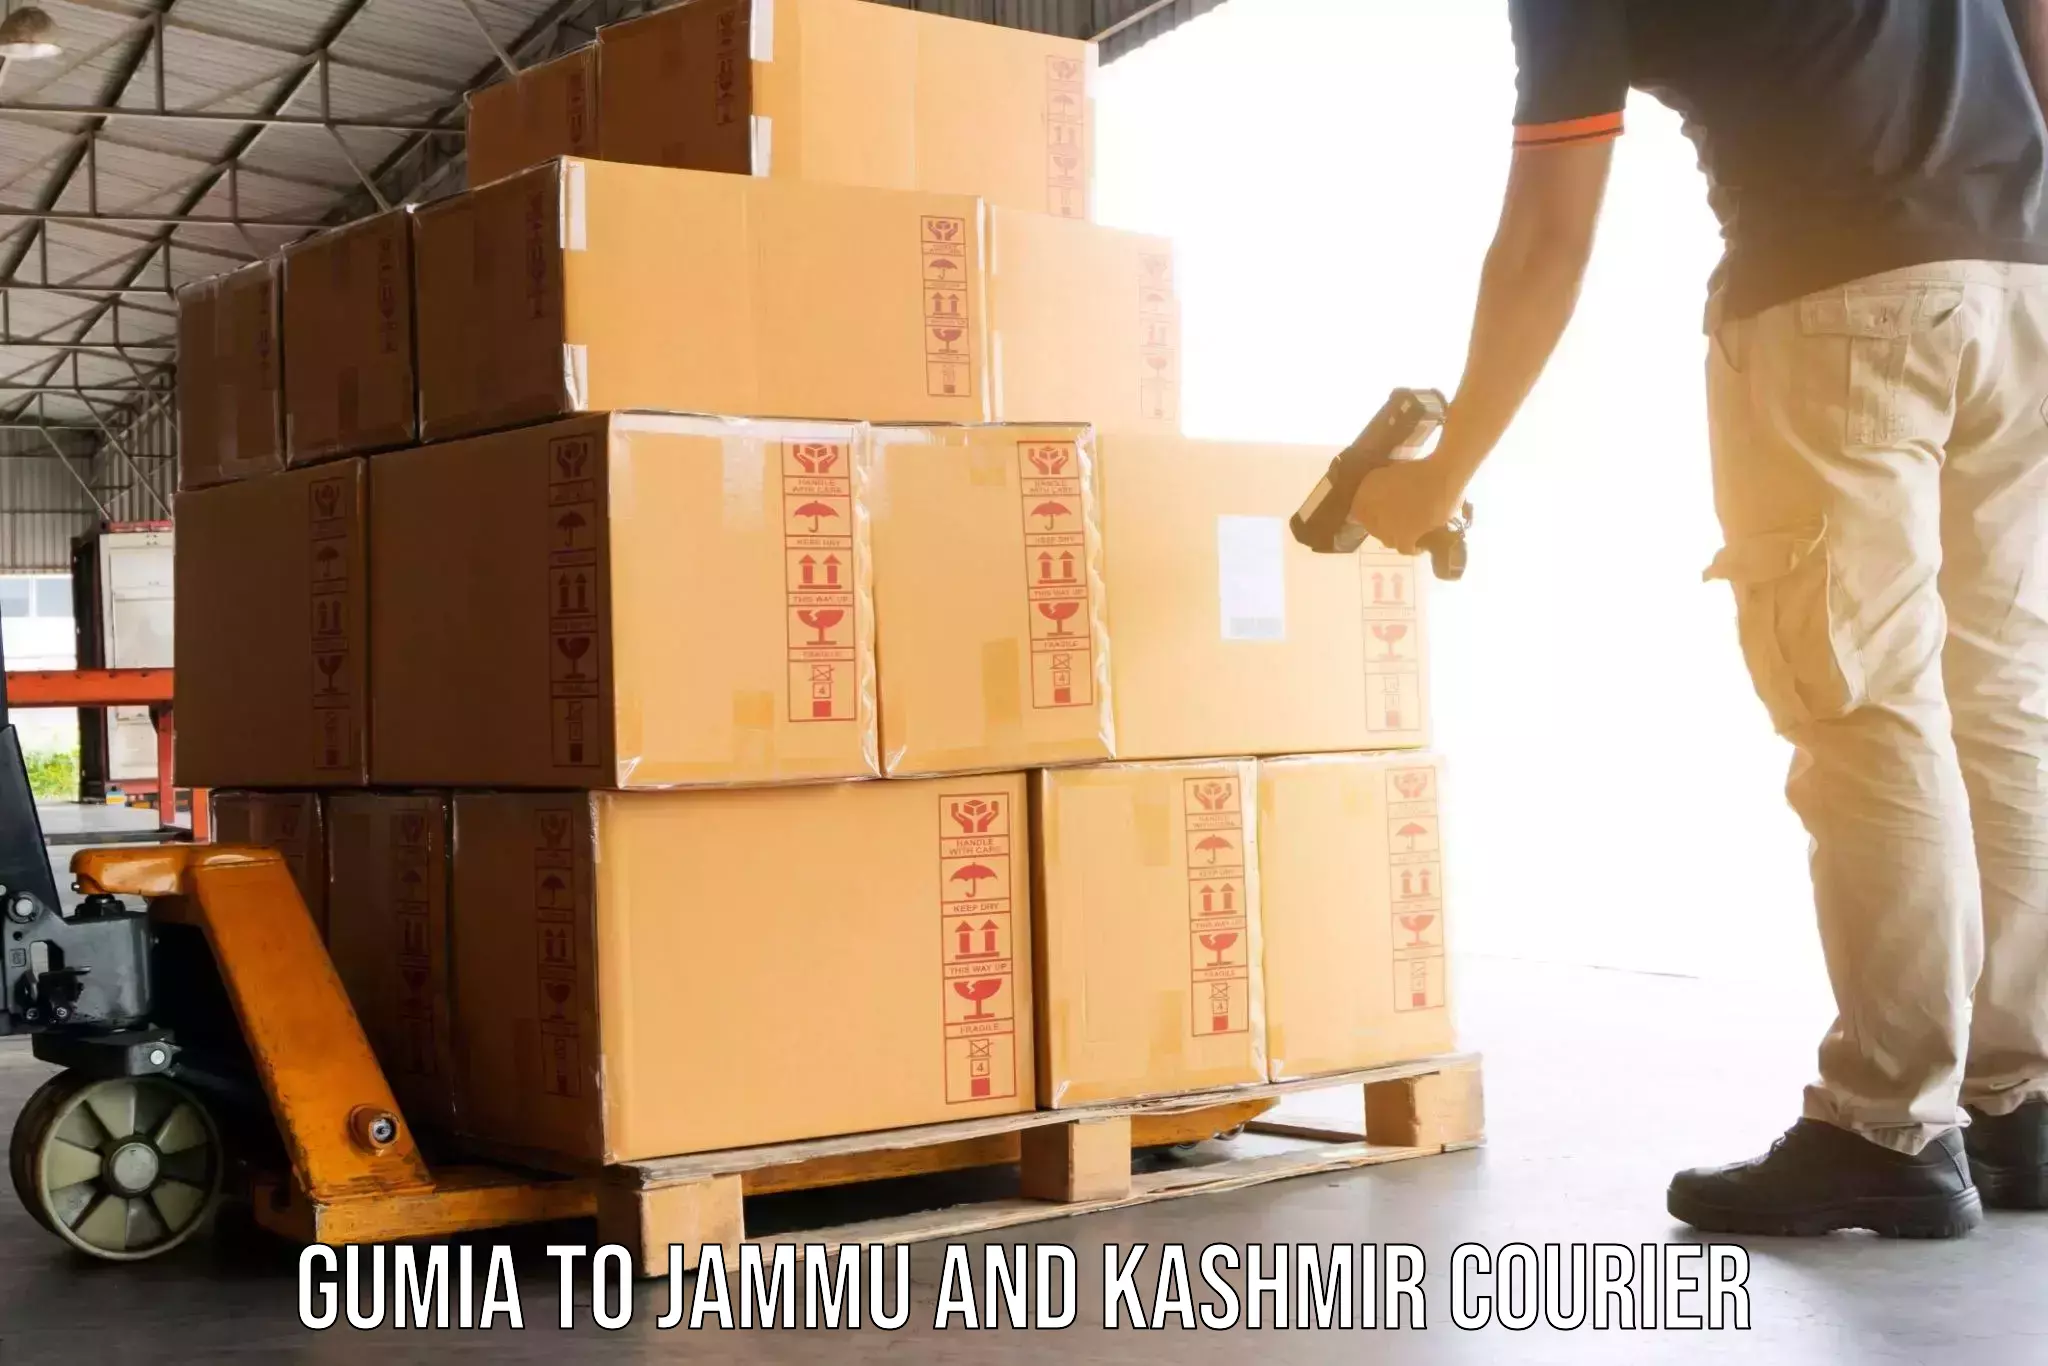 Furniture transport services in Gumia to Baramulla